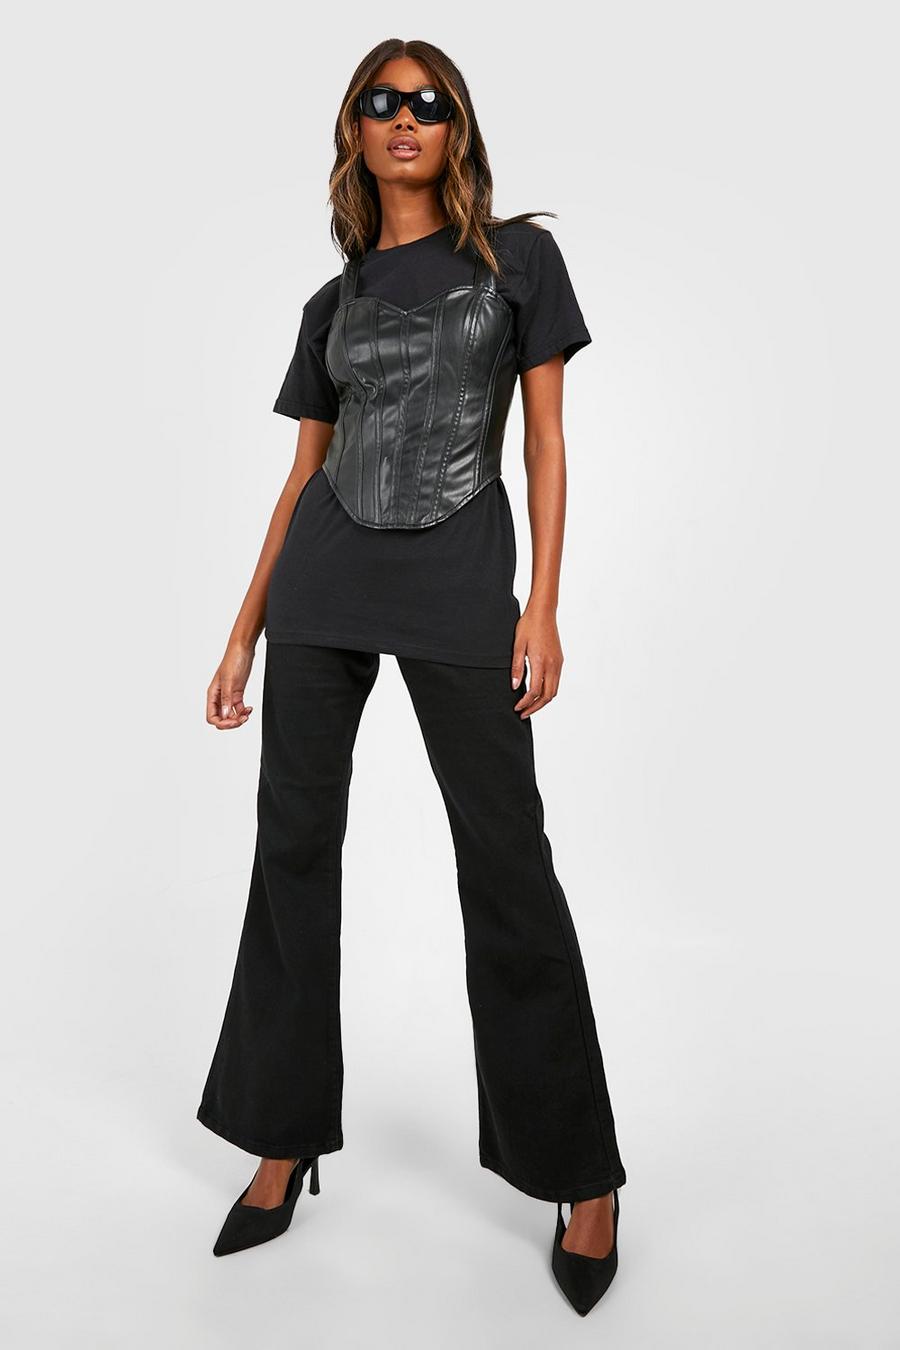 Black High Waisted Disco outd Jeans